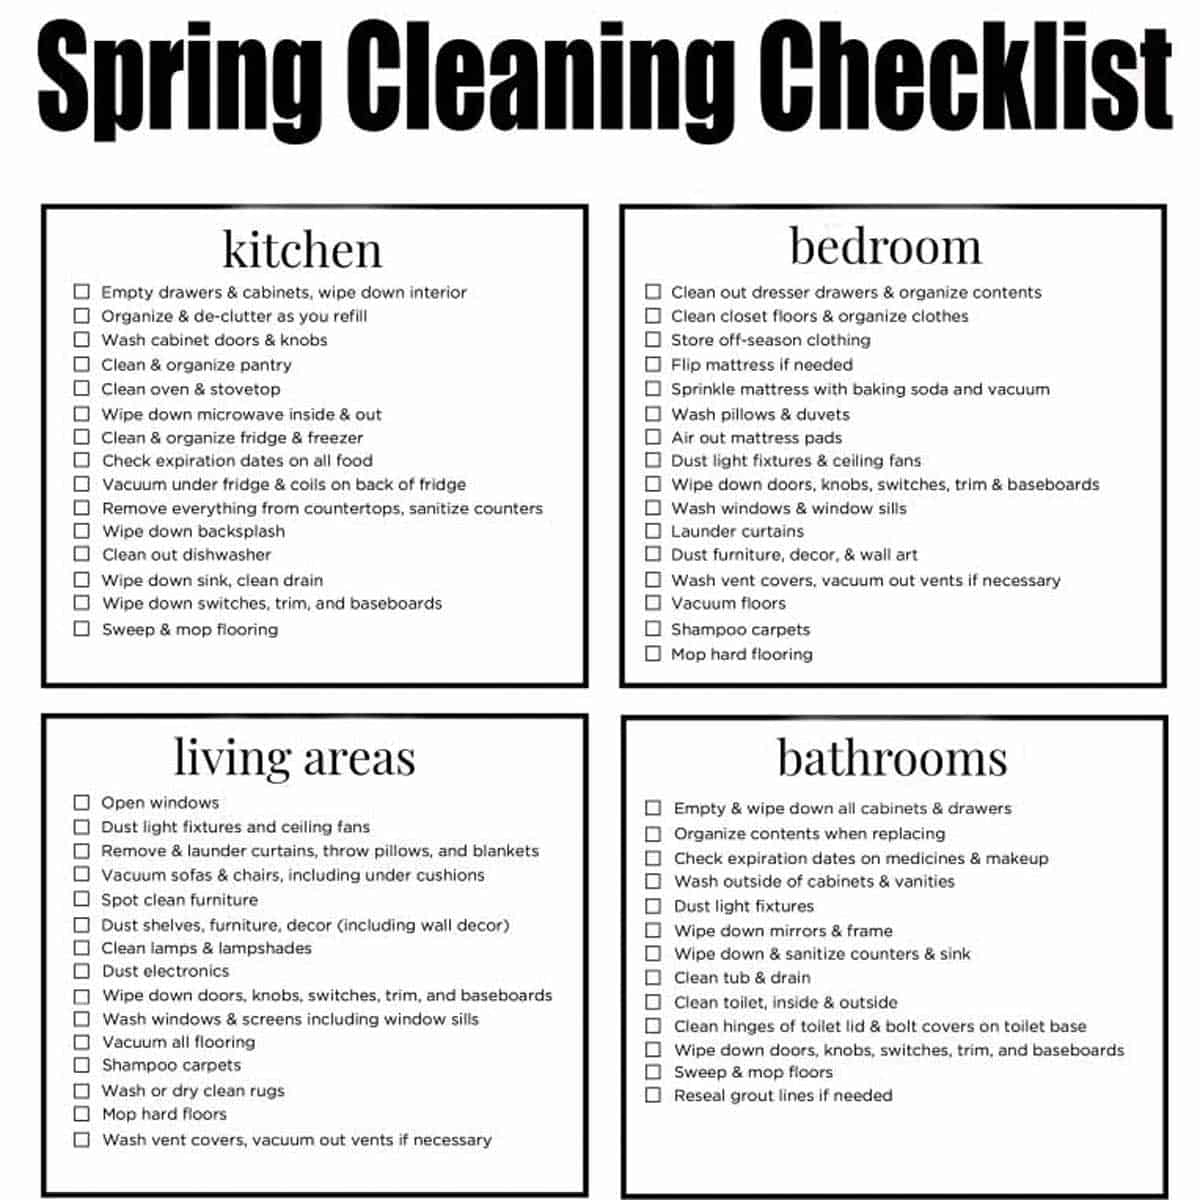 Free Printable Spring Cleaning Checklist Two Designs To Choose From